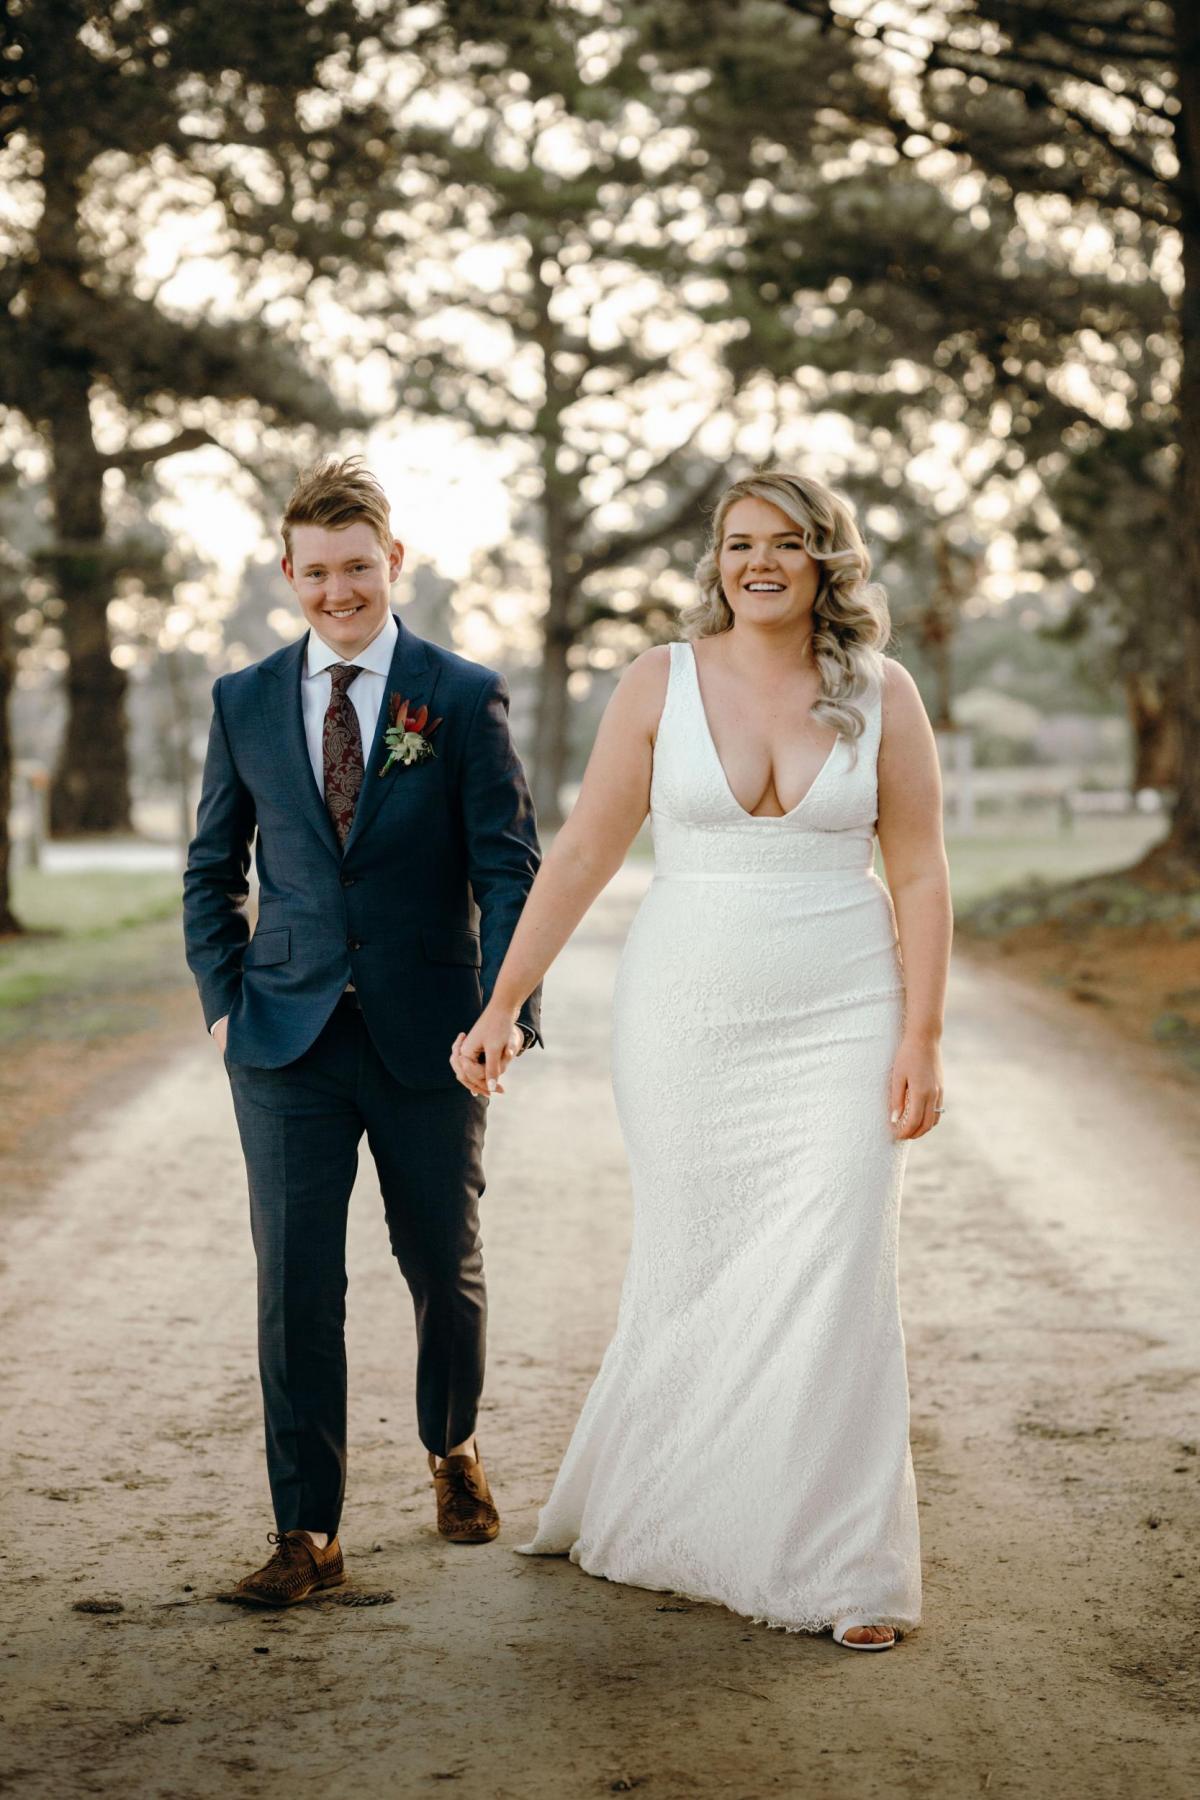 Real bride Ally wore the Curve Adina wedding dress by Karen Willis Holmes.